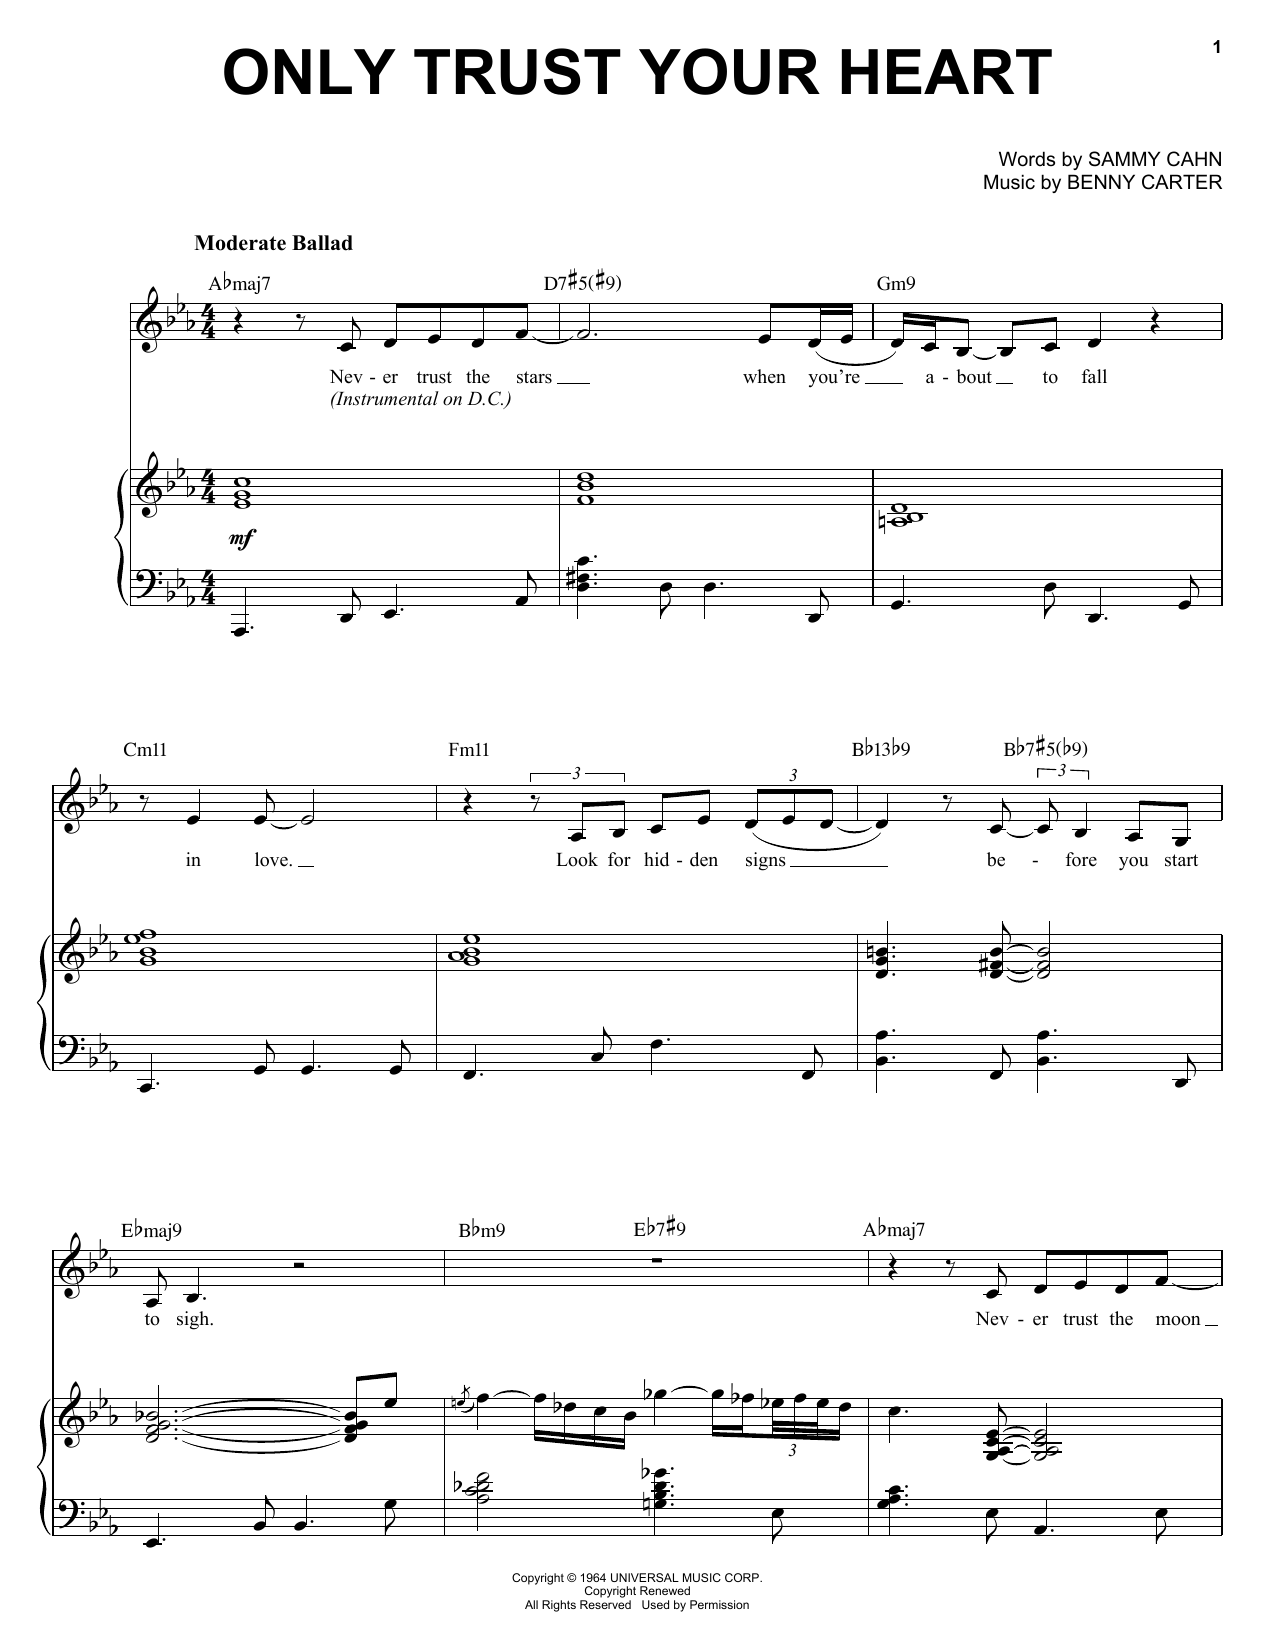 Download Diana Krall Only Trust Your Heart Sheet Music